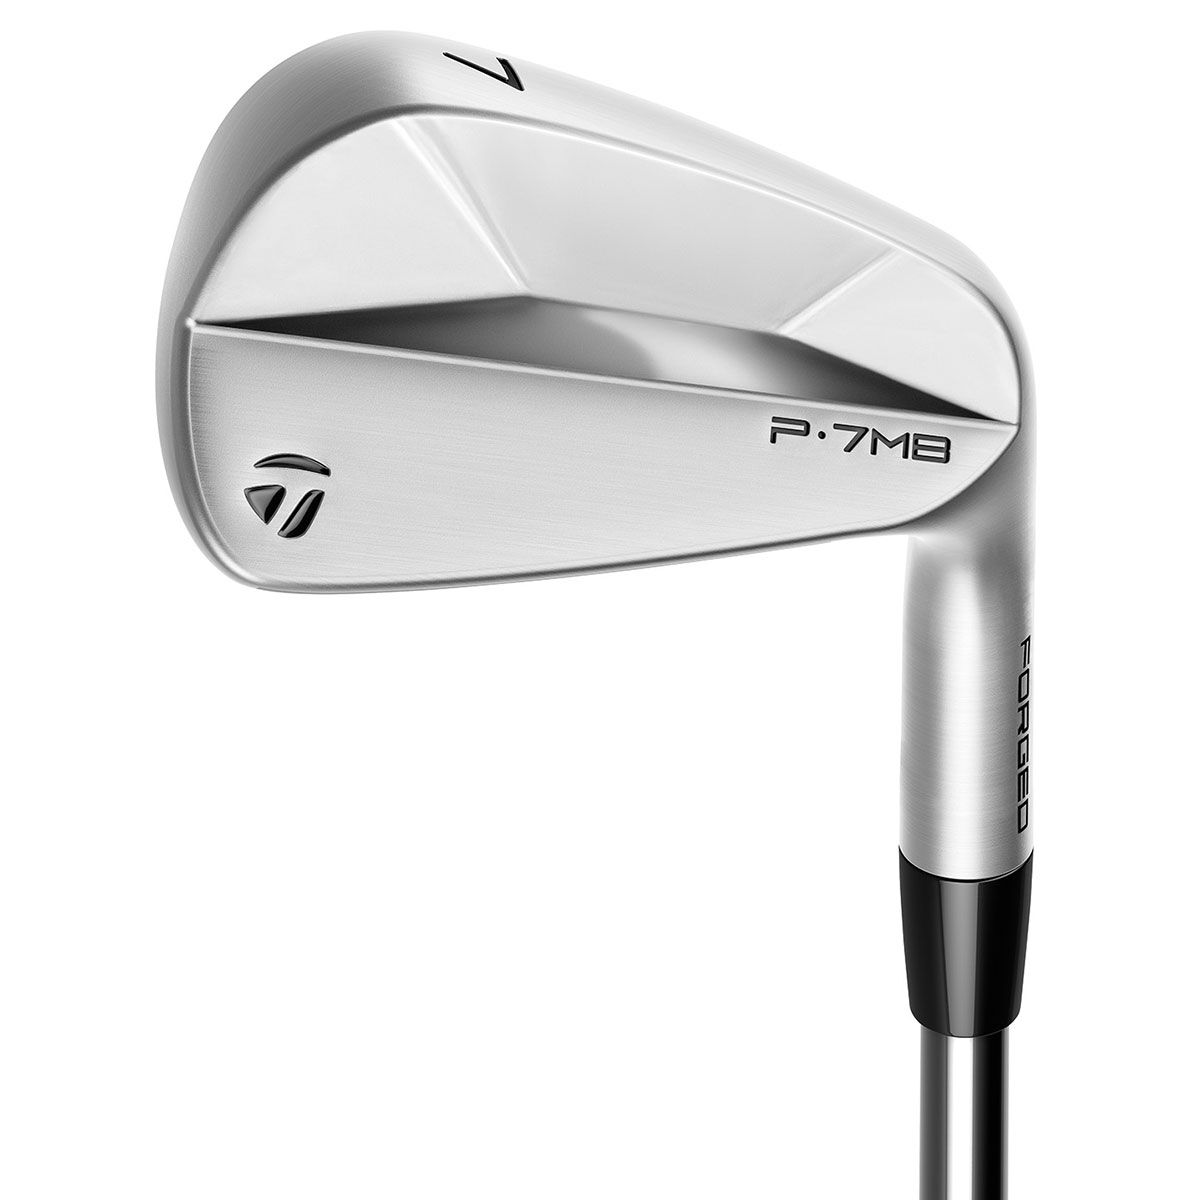 TaylorMade P7MB Steel Golf Irons - Custom Fit, Male | American Golf